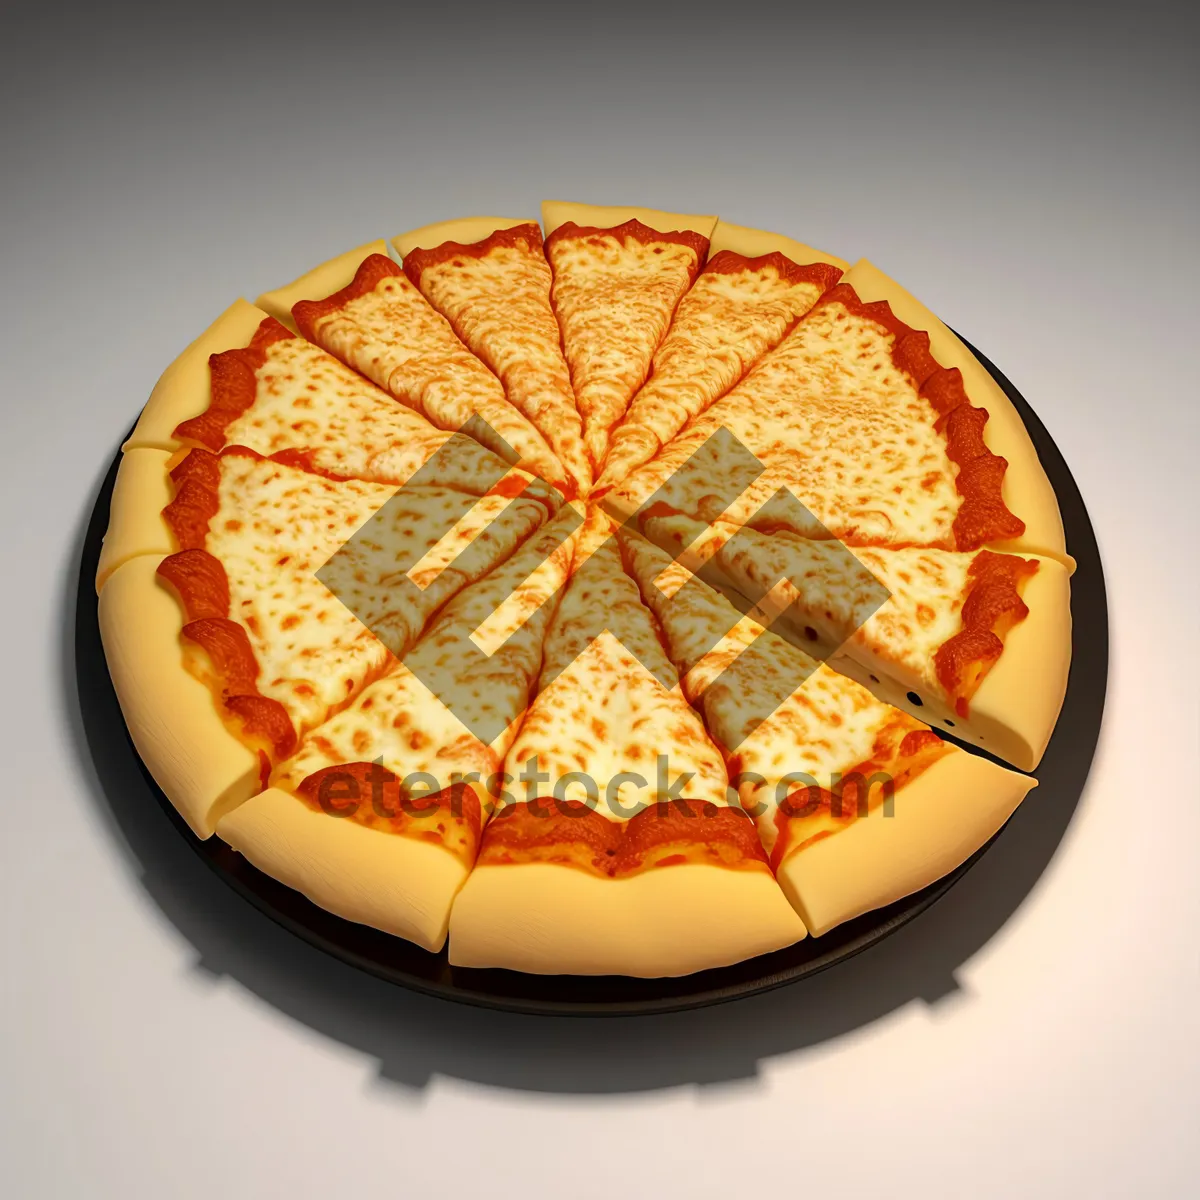 Picture of Delicious Pizza Slice with Citrus Toppings